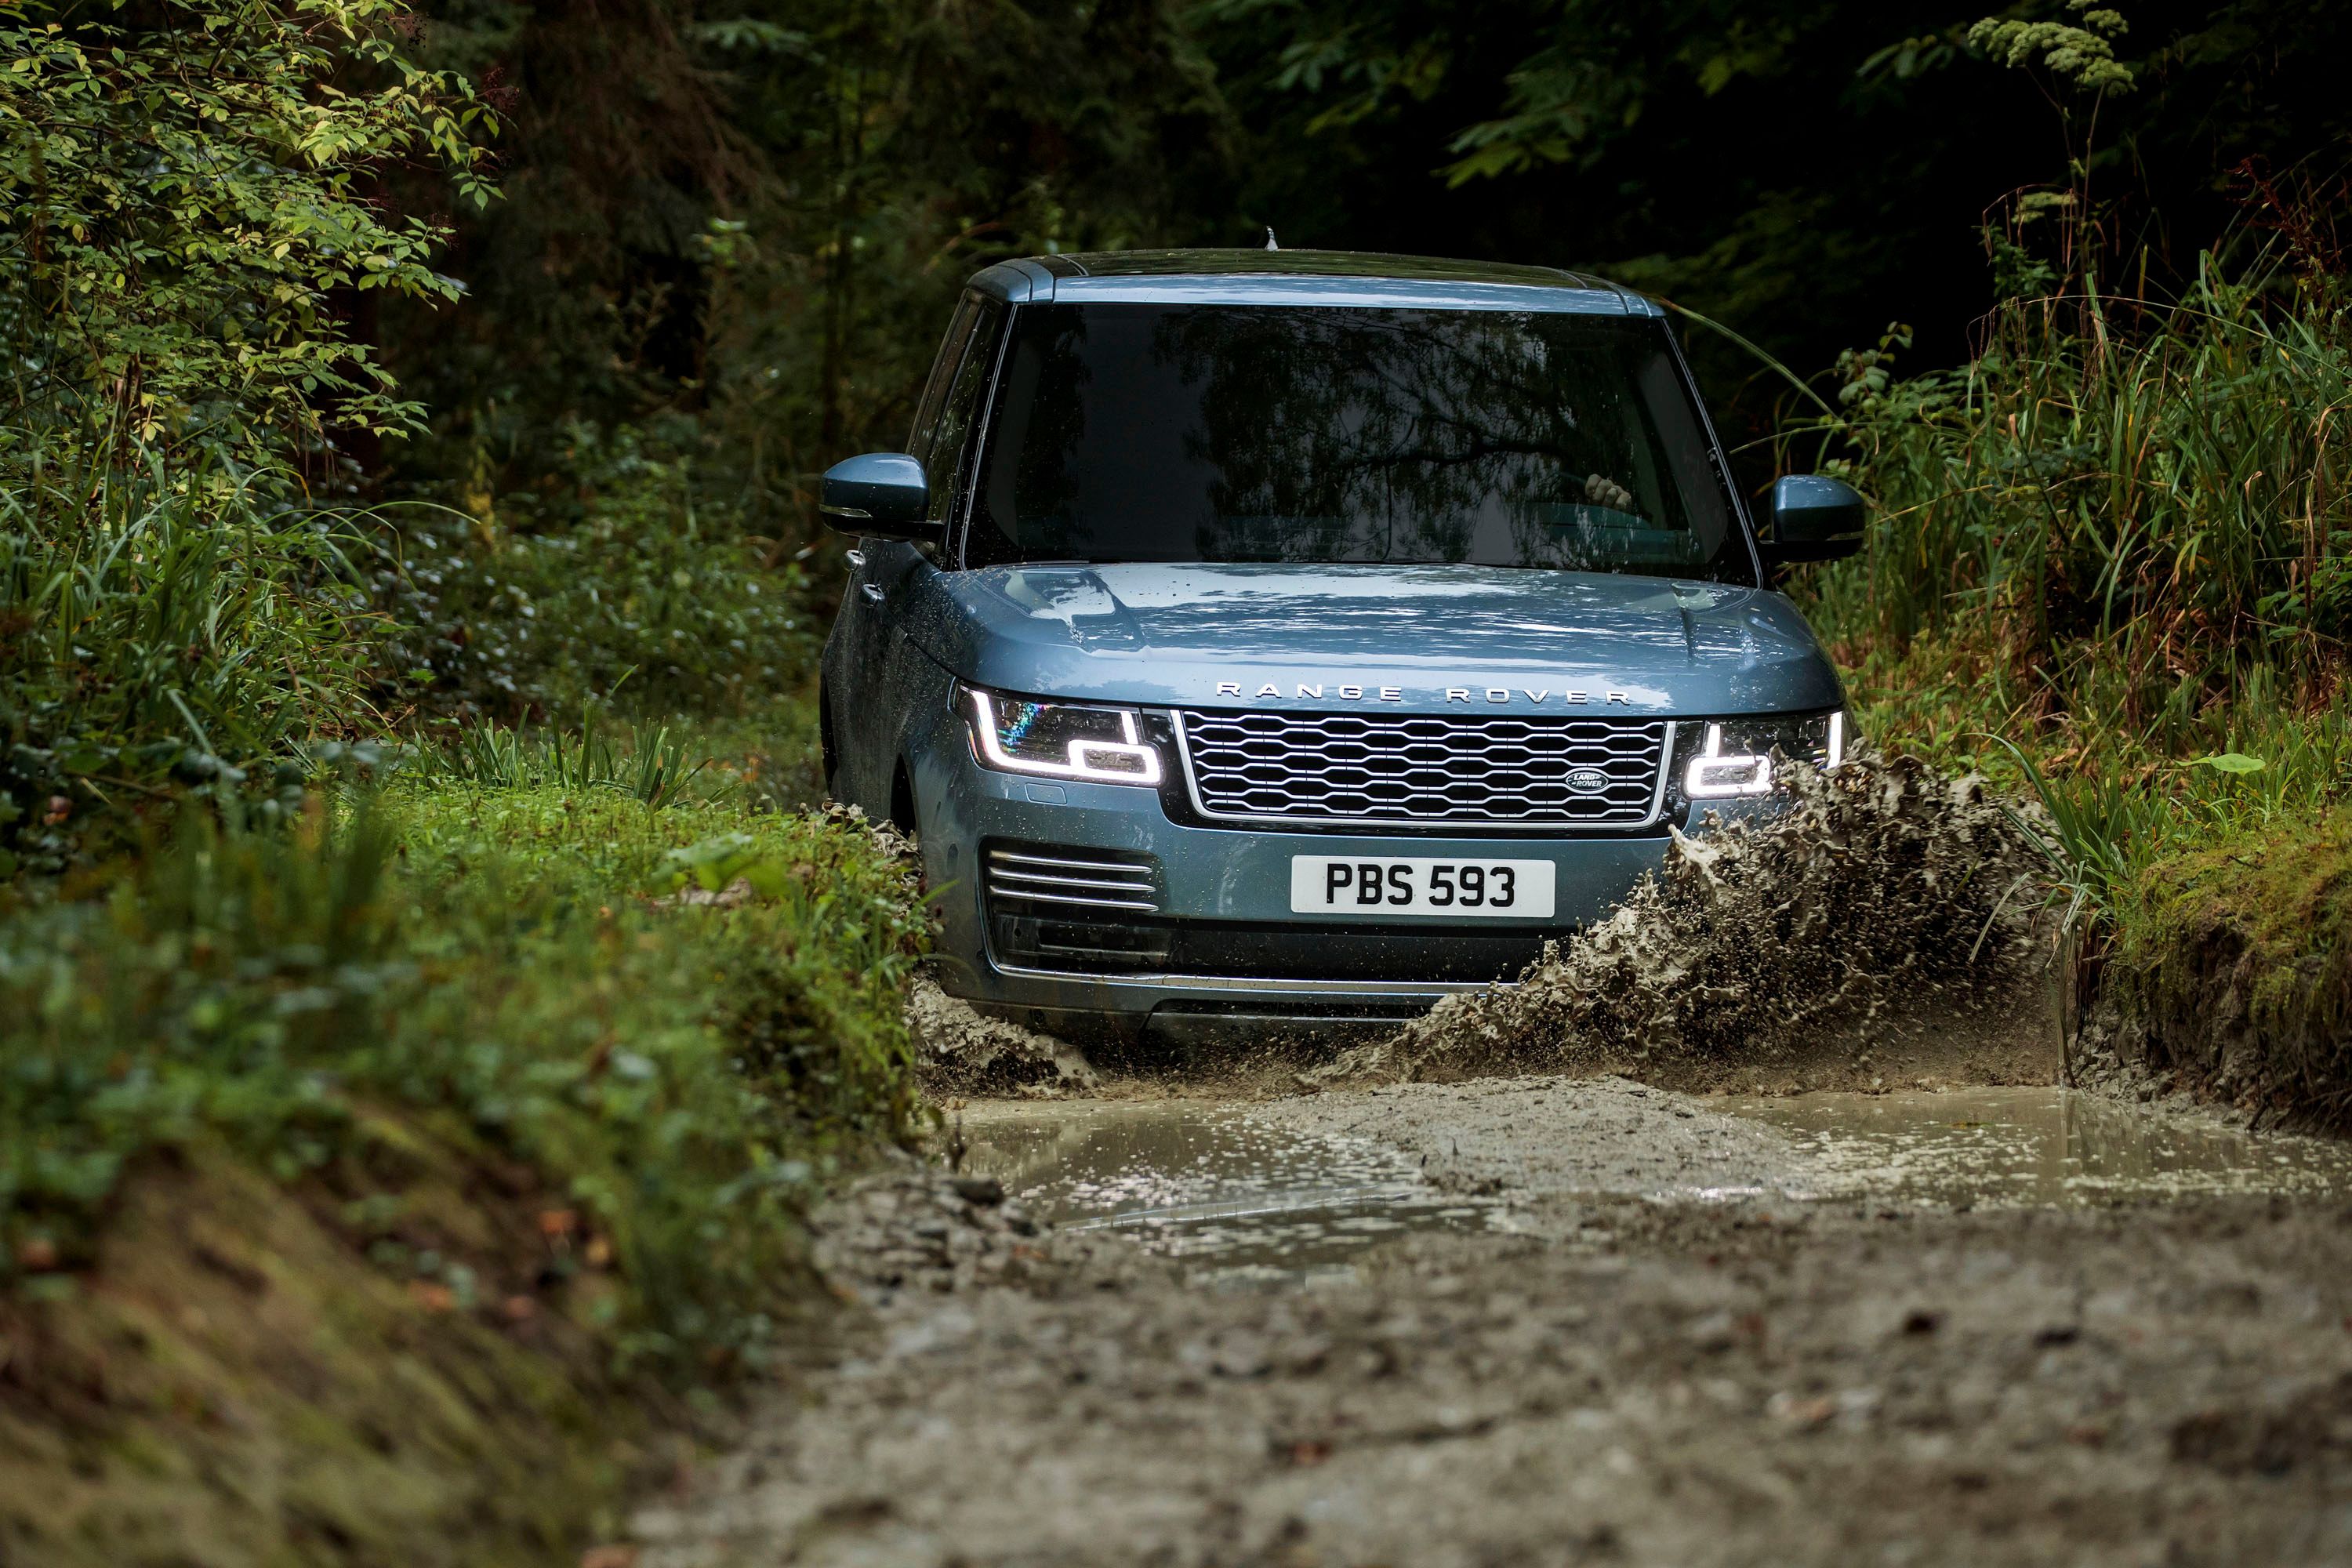 2018 Wallpaper of the Day: 2018 Land Rover Range Rover